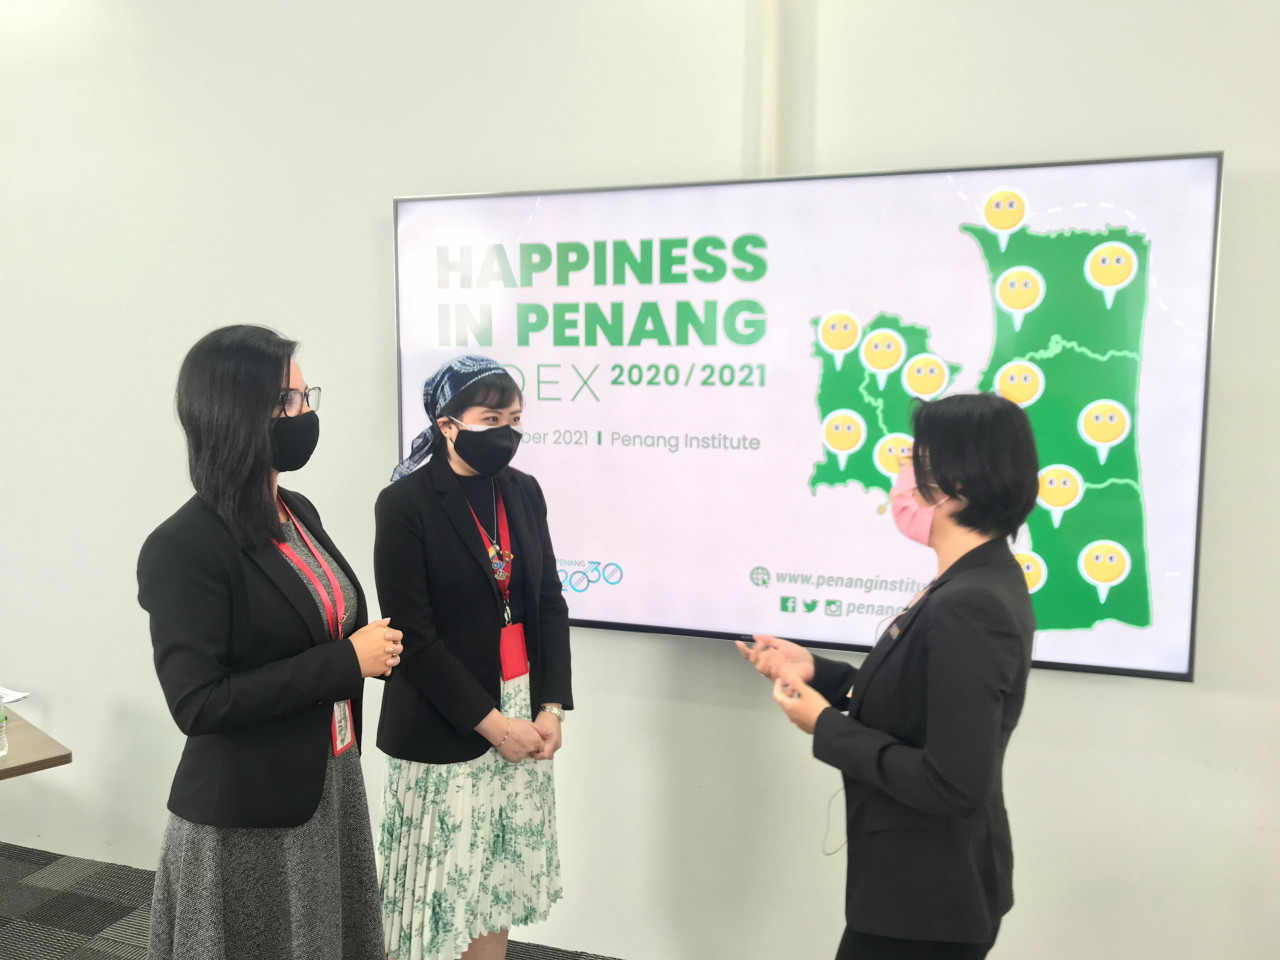 Negin Vaghefi (left) says that the 3,011 respondents statistically represent the population of Penang in terms of population within a district, gender, education, age, and employment status with a margin of error of 2%. – RACHEL YEOH/The Vibes pic, November 24, 2021